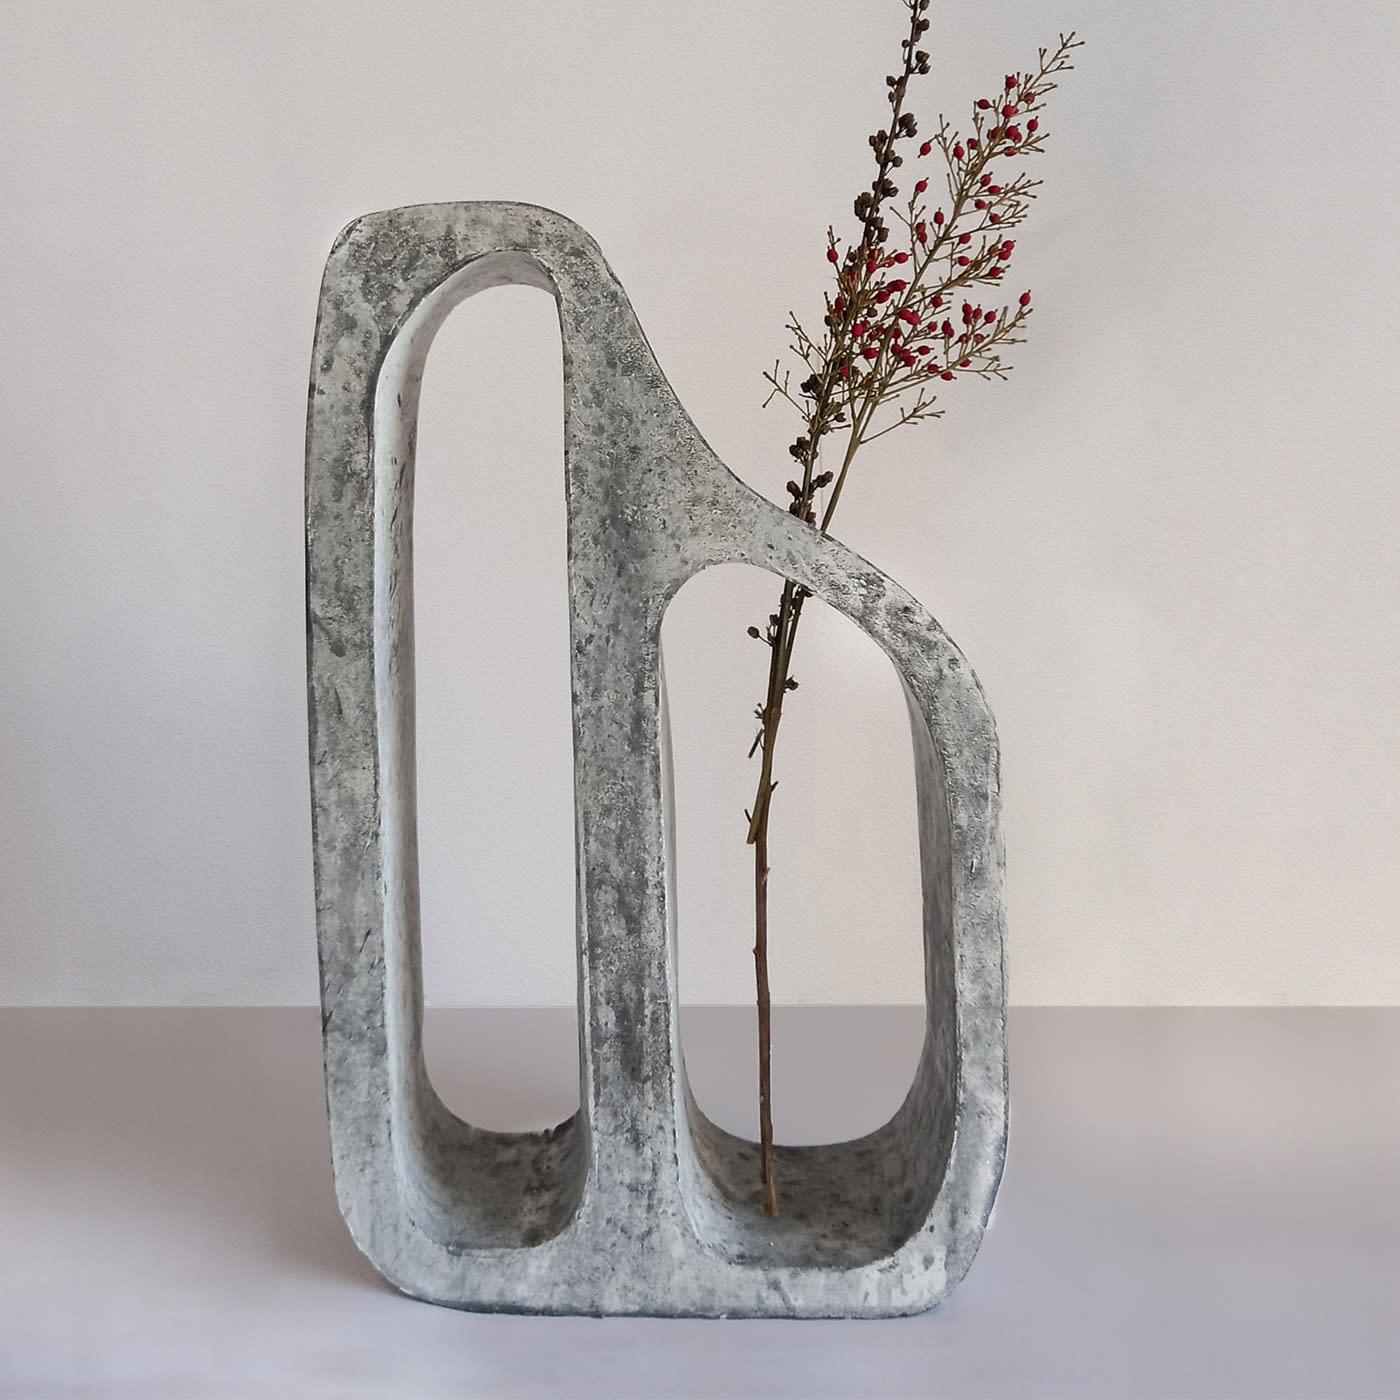 Flintstone Grey is distinguished by three pillars that connect an irregular curve line above. The irregular shape and the wide range of grey colors resemble natural stones (Dimensions: W 25 x D 7 x H 36). 
The second piece of the set refers to